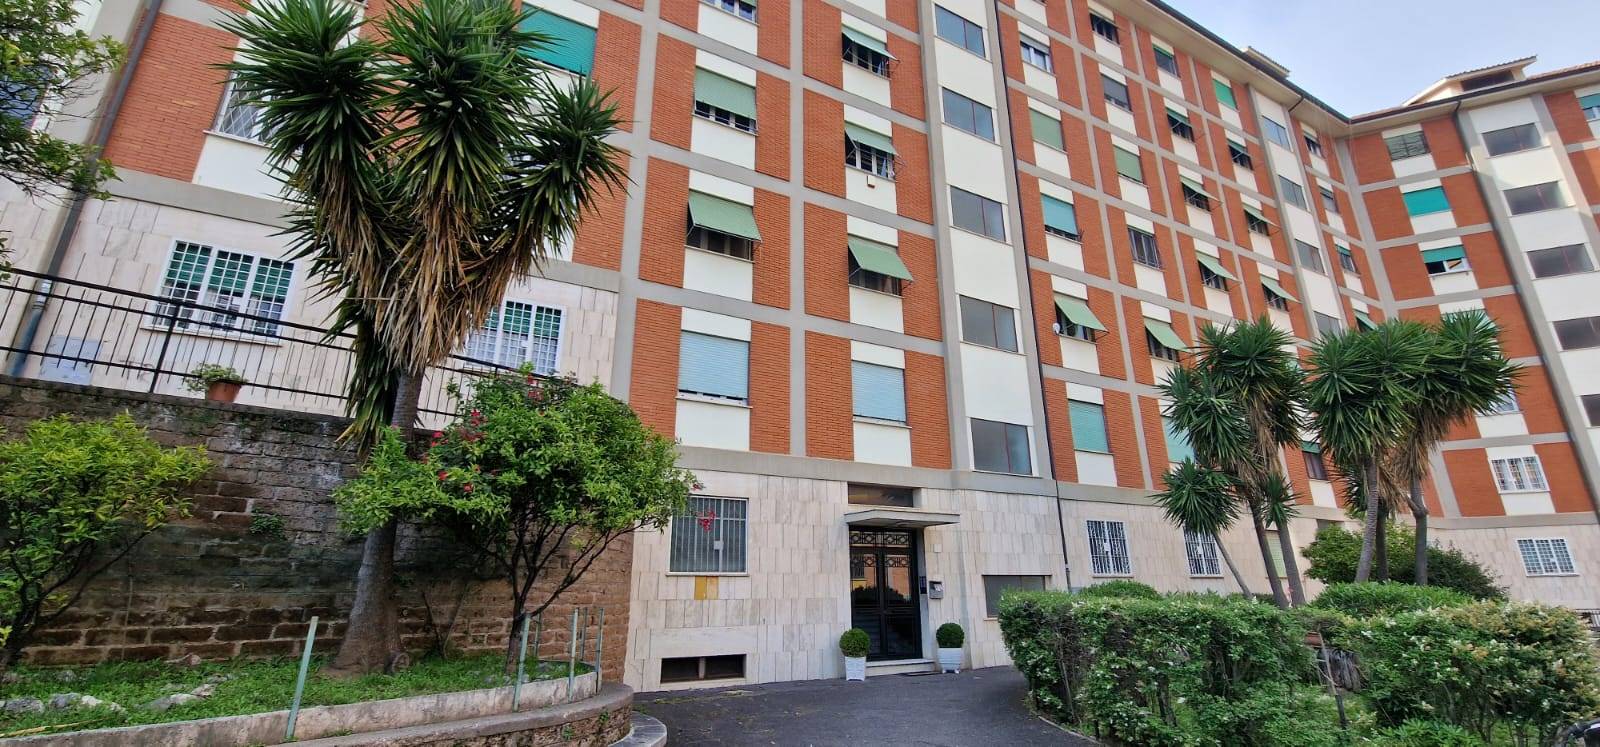 TORRE SPACCATA, ROMA, Apartment for rent of 15 Sq. mt., Good condition, Heating Individual heating system, Energetic class: G, placed at 3°, composed by: 2 Rooms, Separate kitchen, 2 Bedrooms, 1 